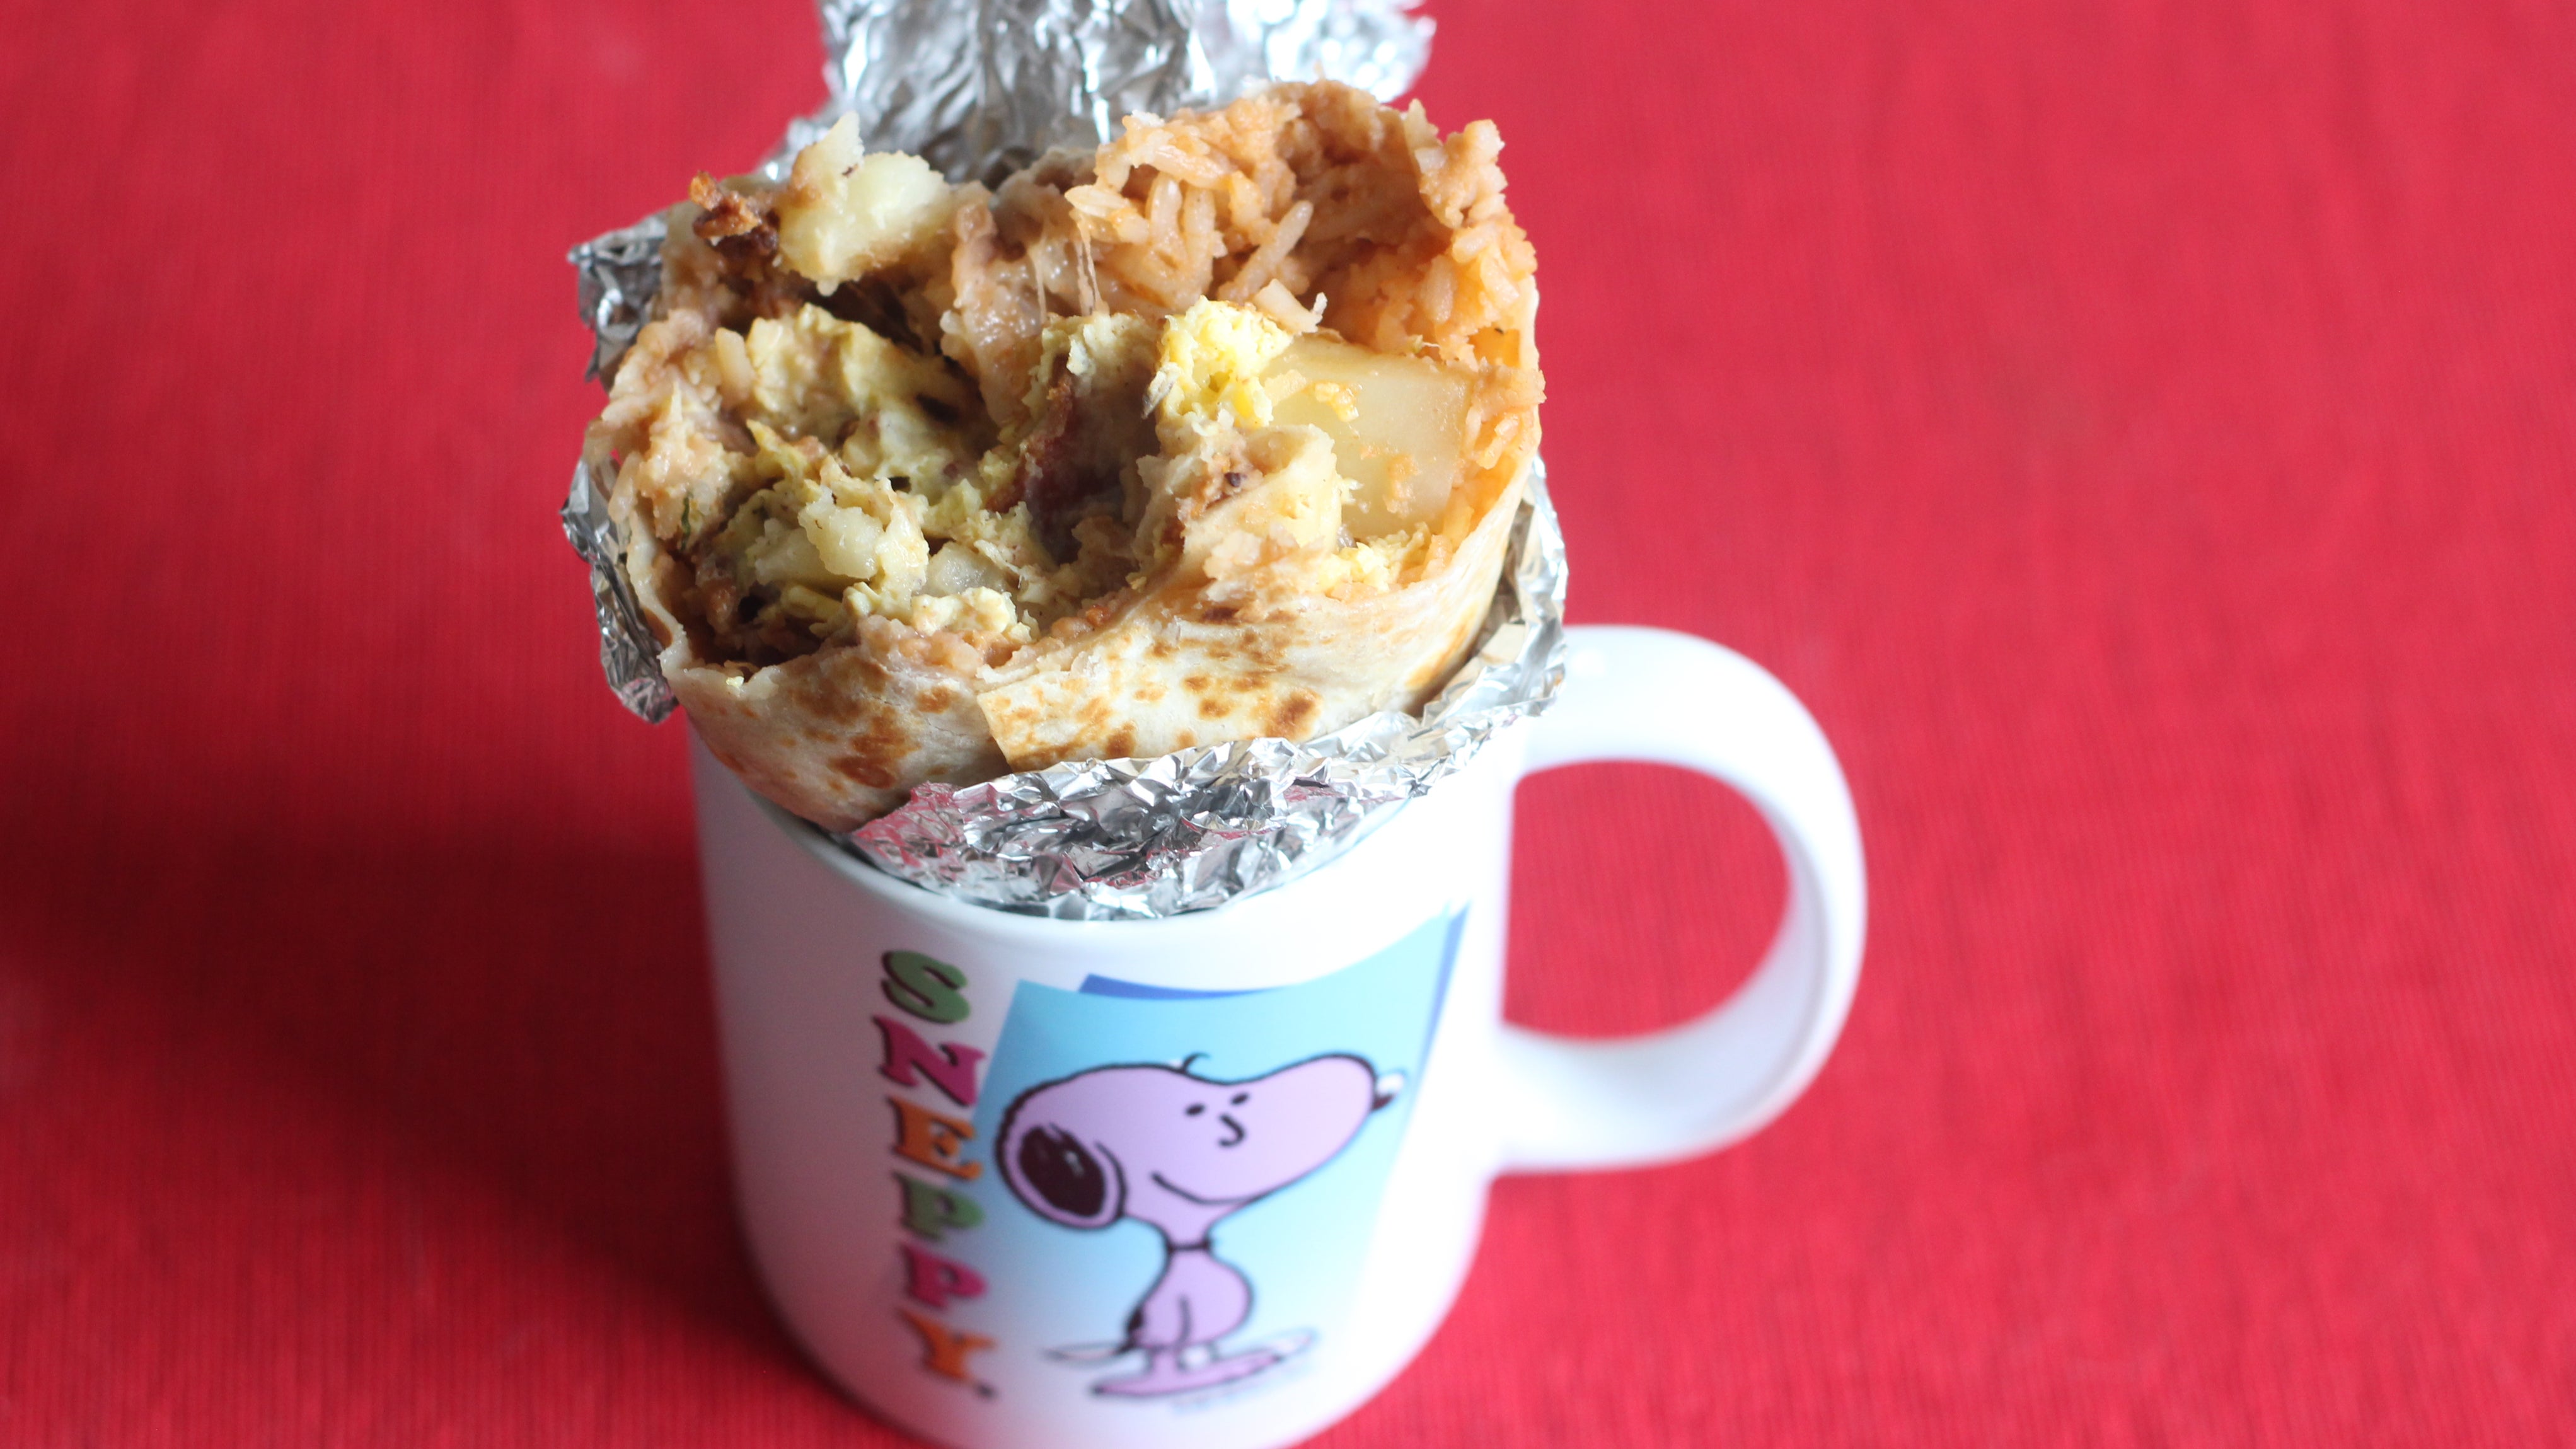 Put Your Burrito In A Mug Instead Of On A Plate